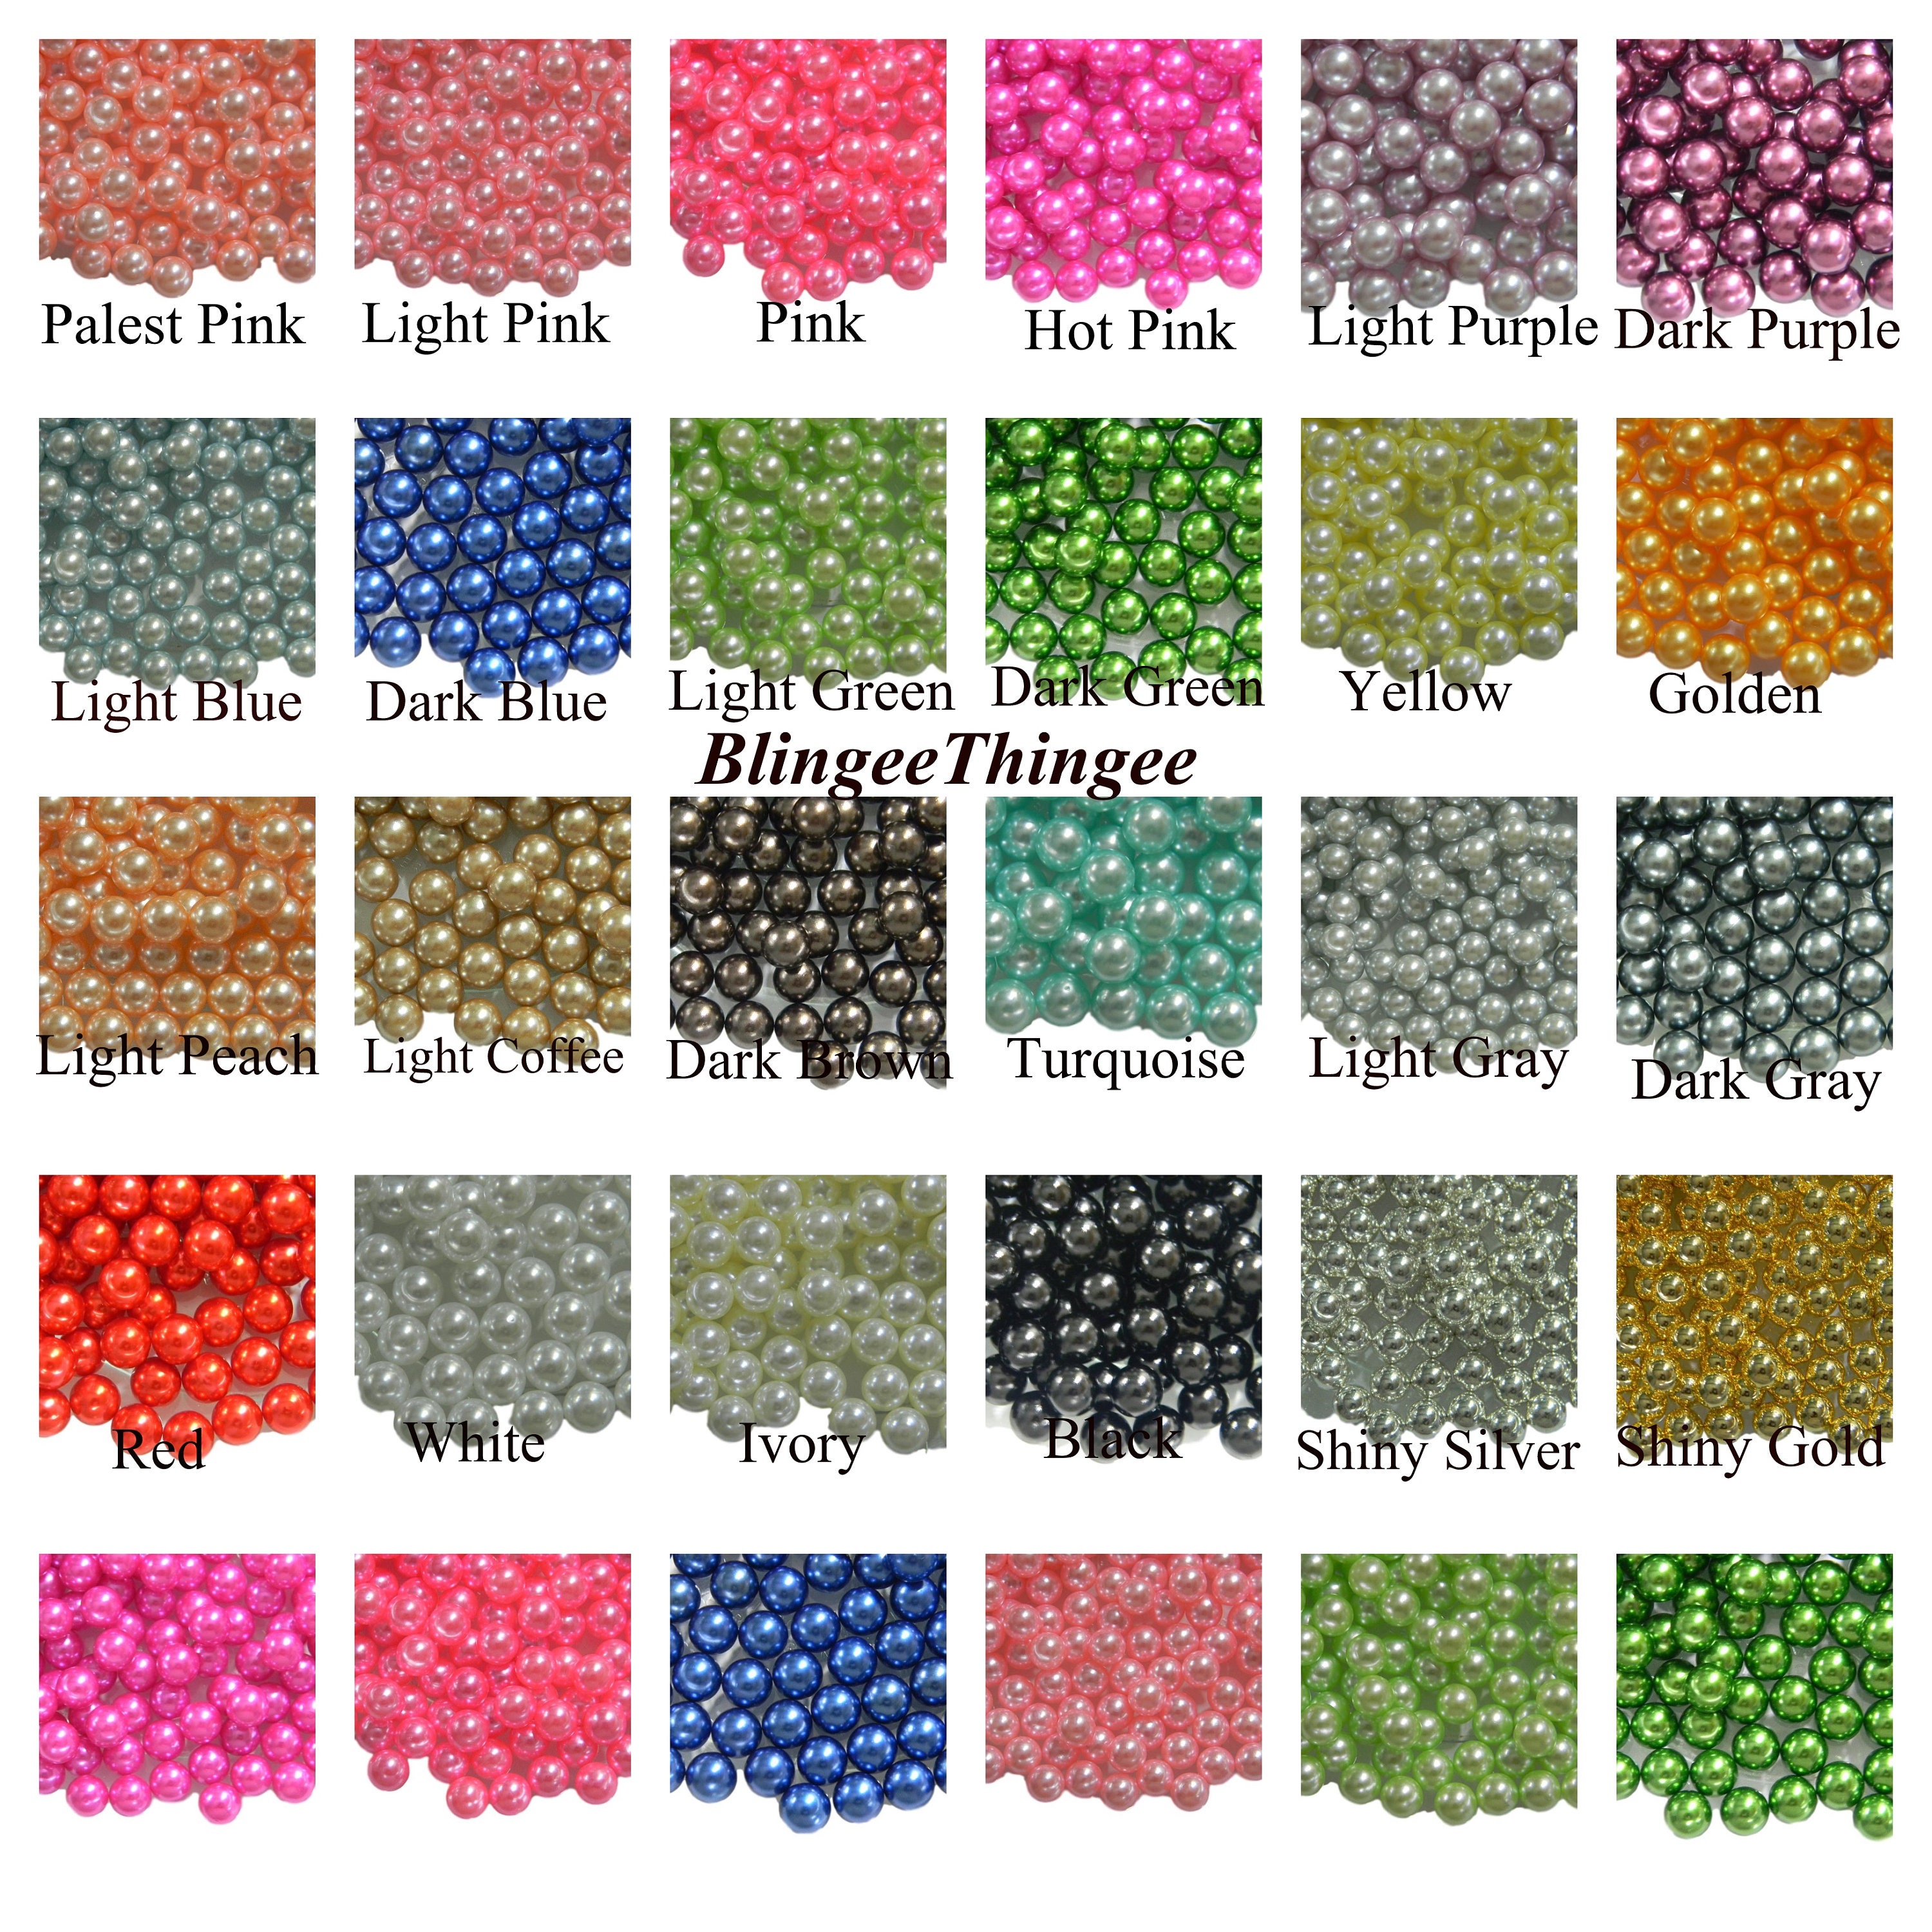 UV Beads, Multi Colored (50 pack)